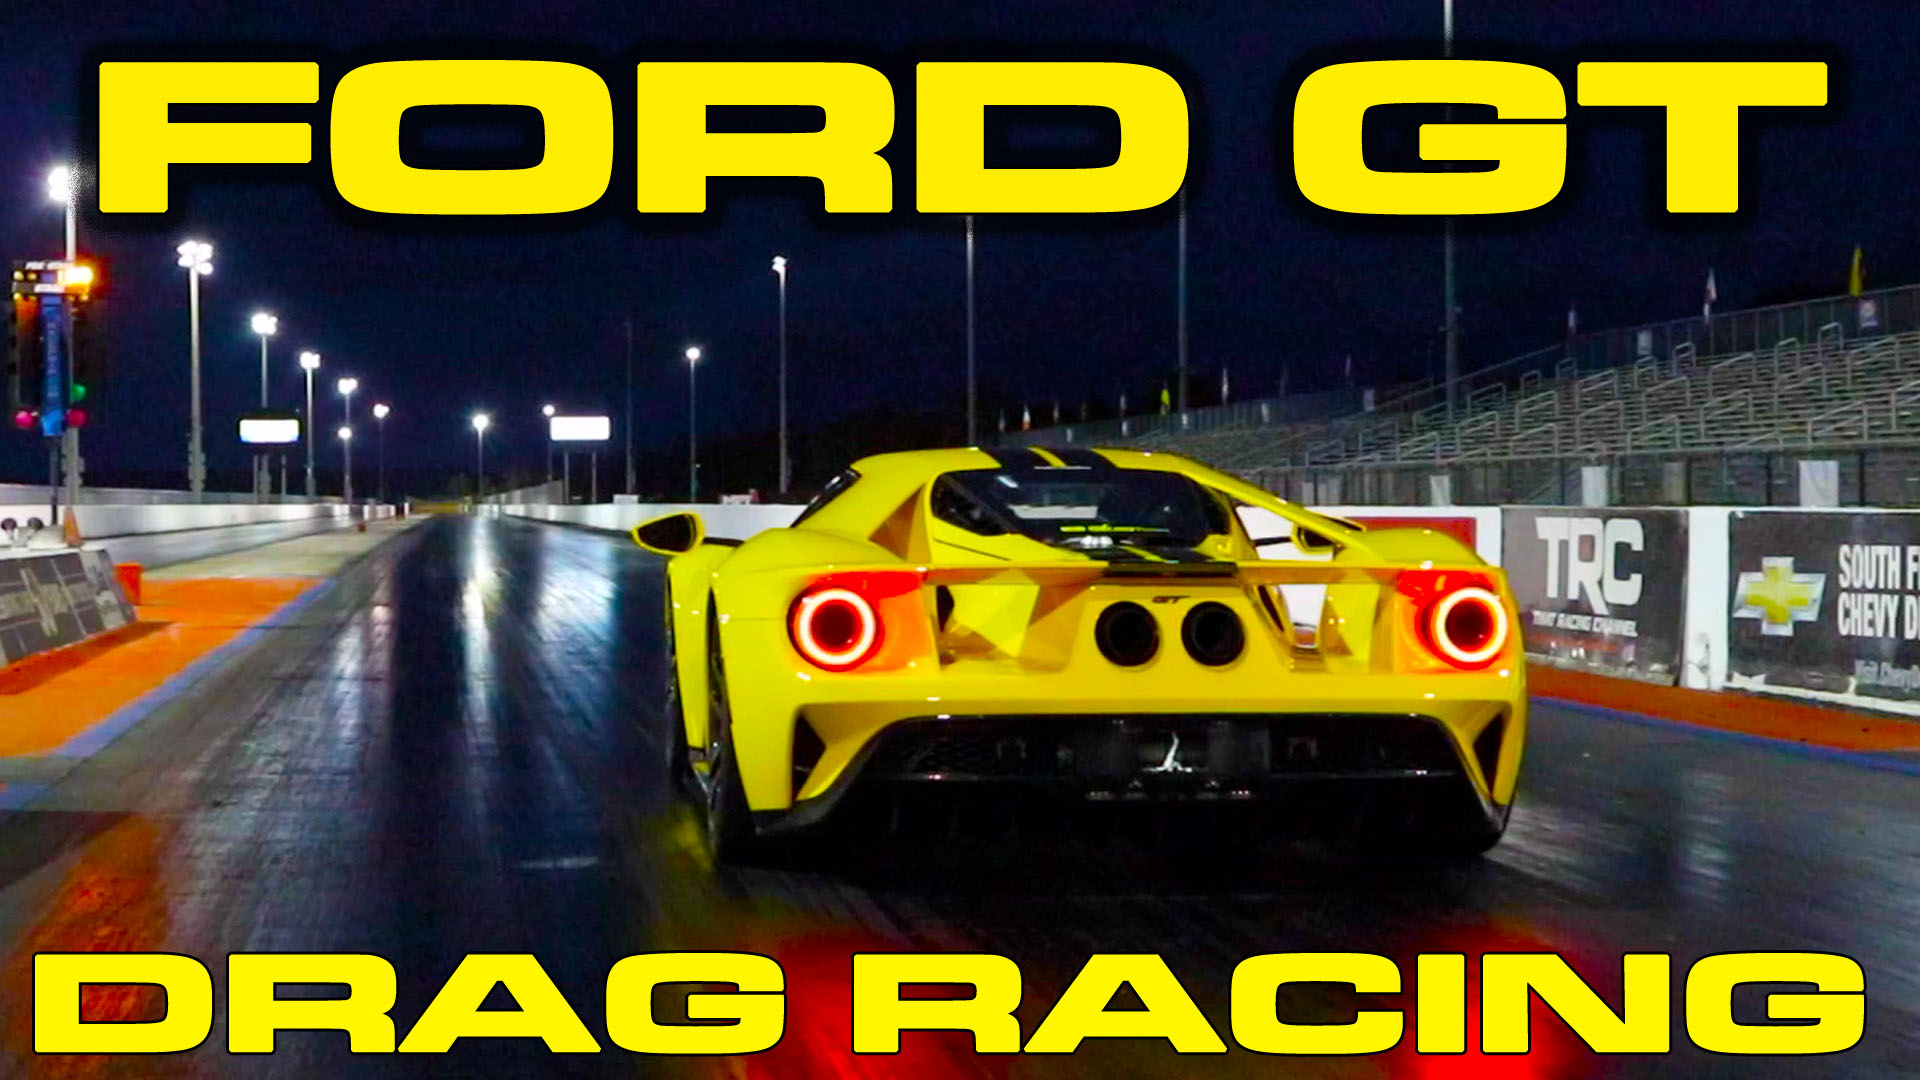 new Ford GT 1/4 Mile